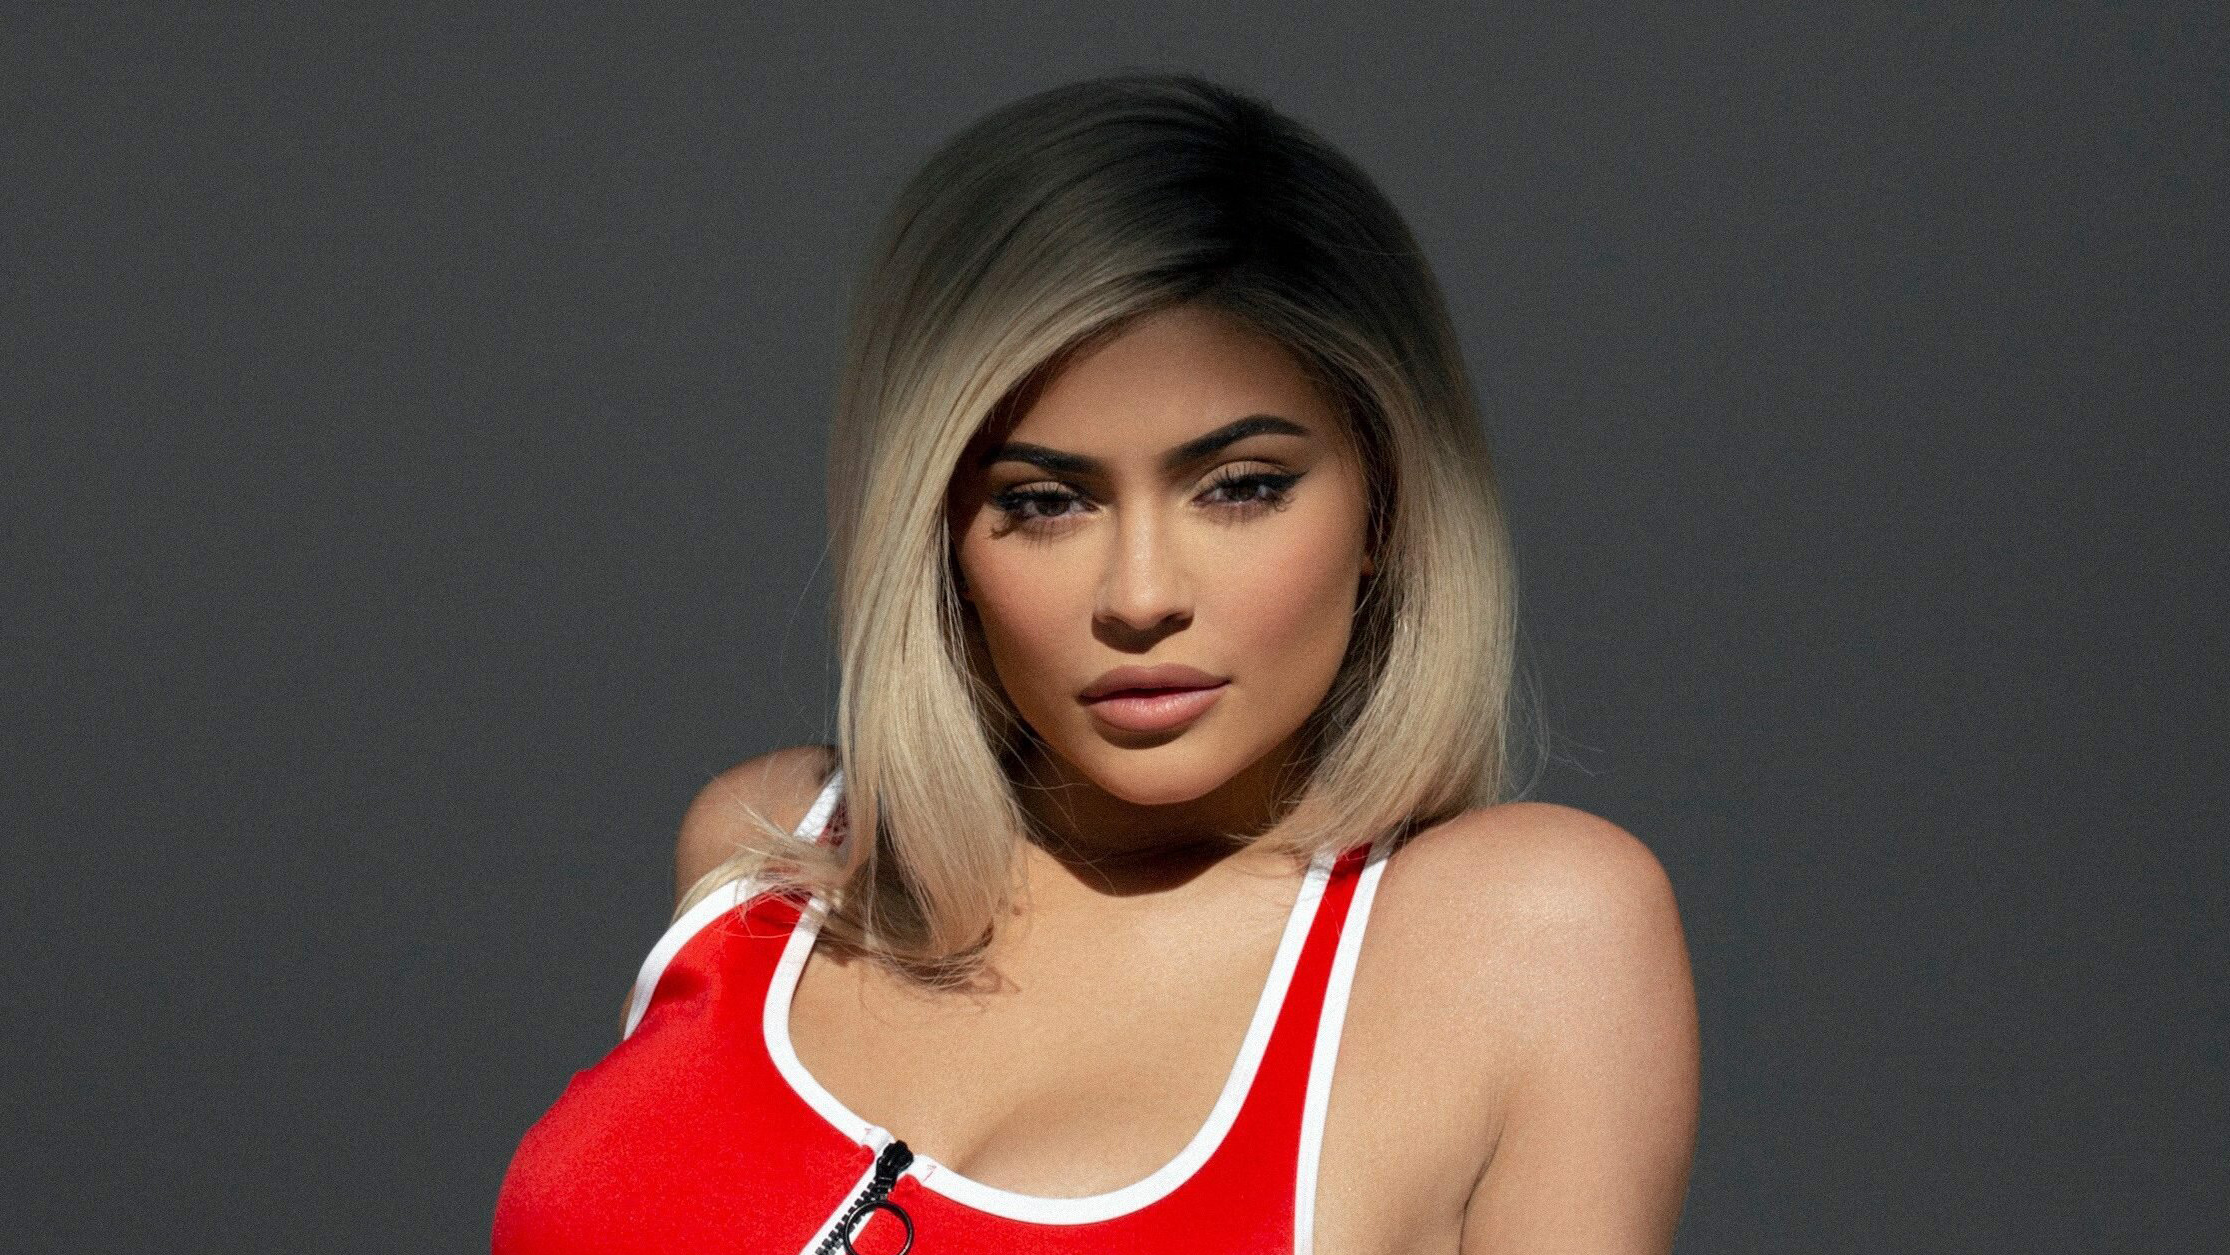 Kylie Jenner Photoshoot 2019 Wallpapers